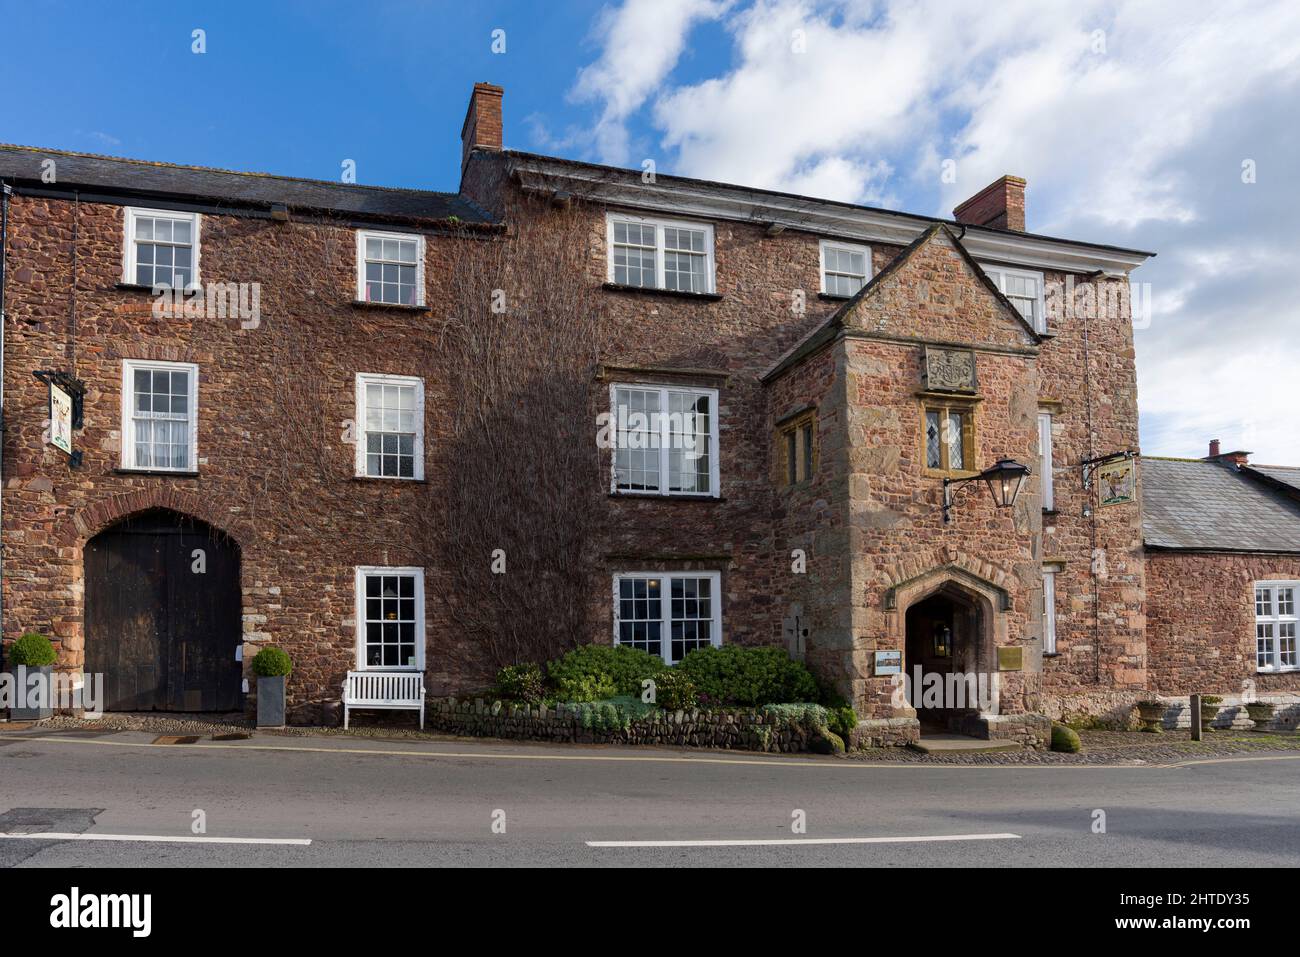 The Luttrell Arms Hotel in the village of Dunster on the edge of the Exmoor National Park near Minehead, Somerset, England. Stock Photo